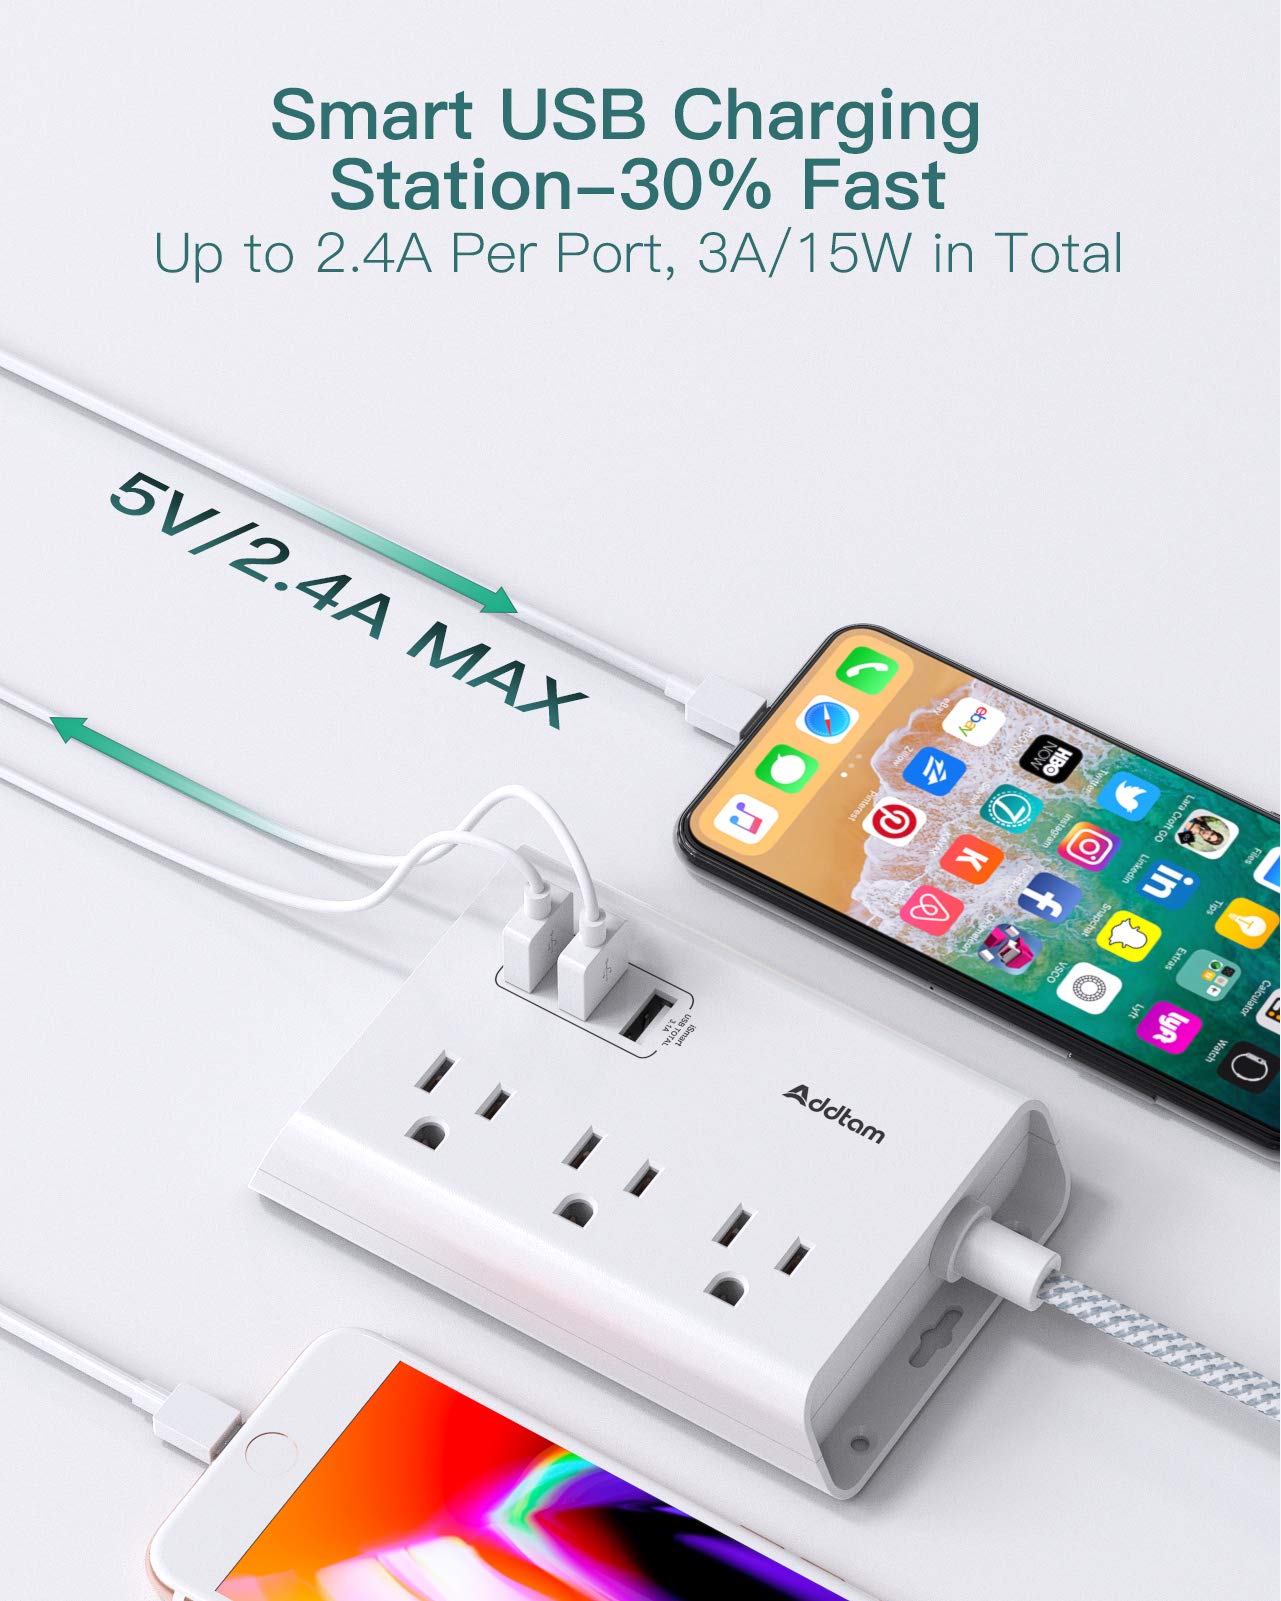 Surge Protector Power Strip, 8 Widely Outlets with 4 USB Ports(1 USB C Outlet) and 3 Outlets with 3 USB Ports, Flat Plug Extension Cord, Wall Mount for Dorm Home Office, ETL Listed